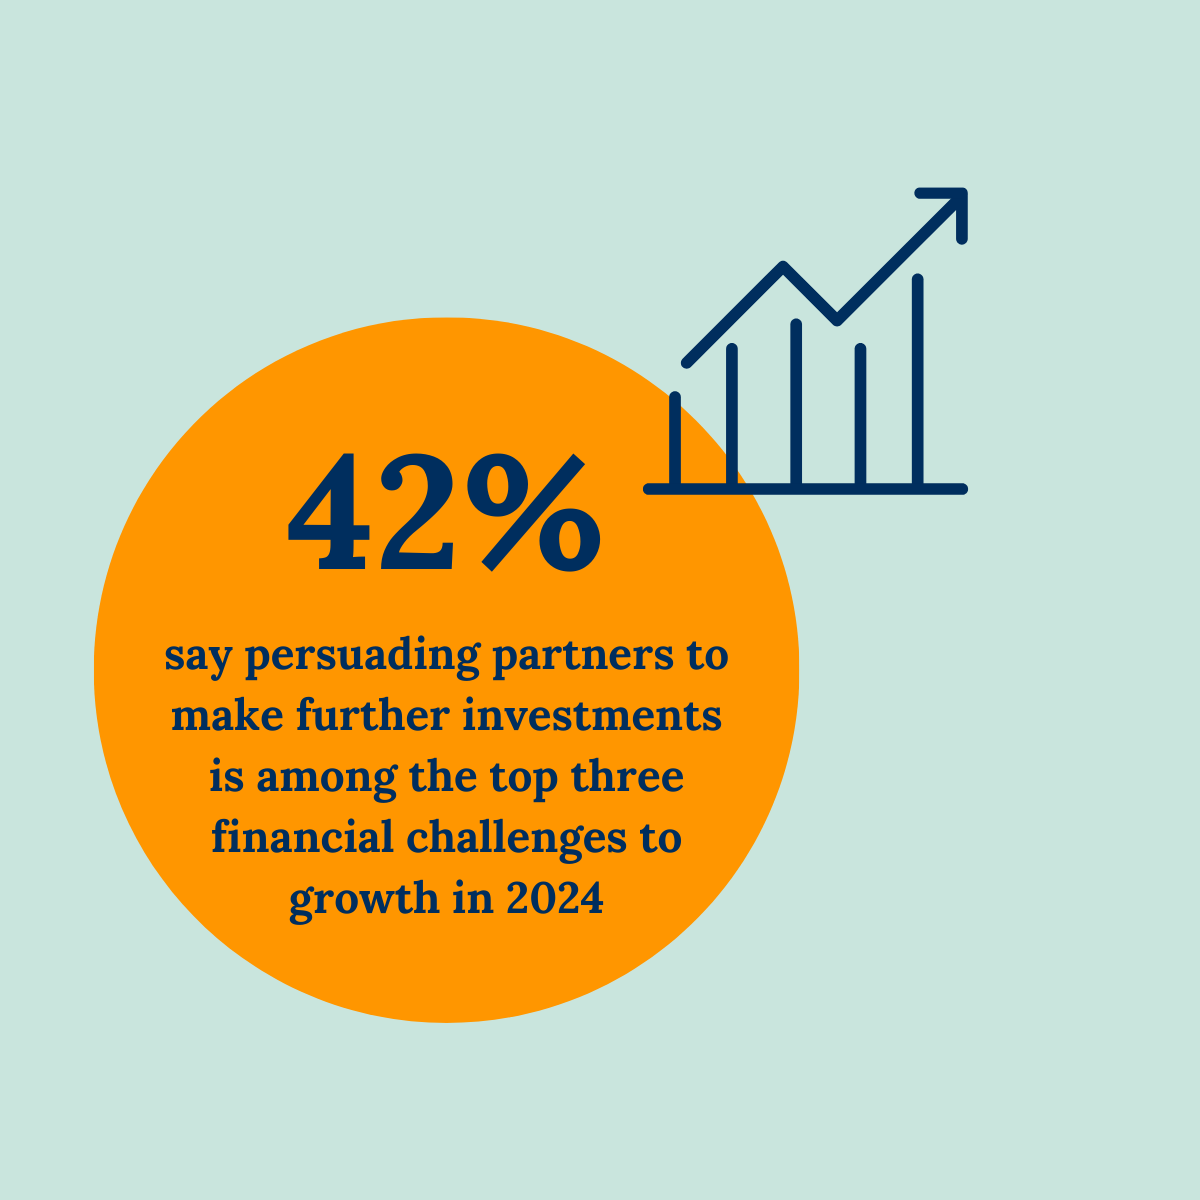 42% say persuading partners to make further investments is among the top three financial challenges to growth in 2024 